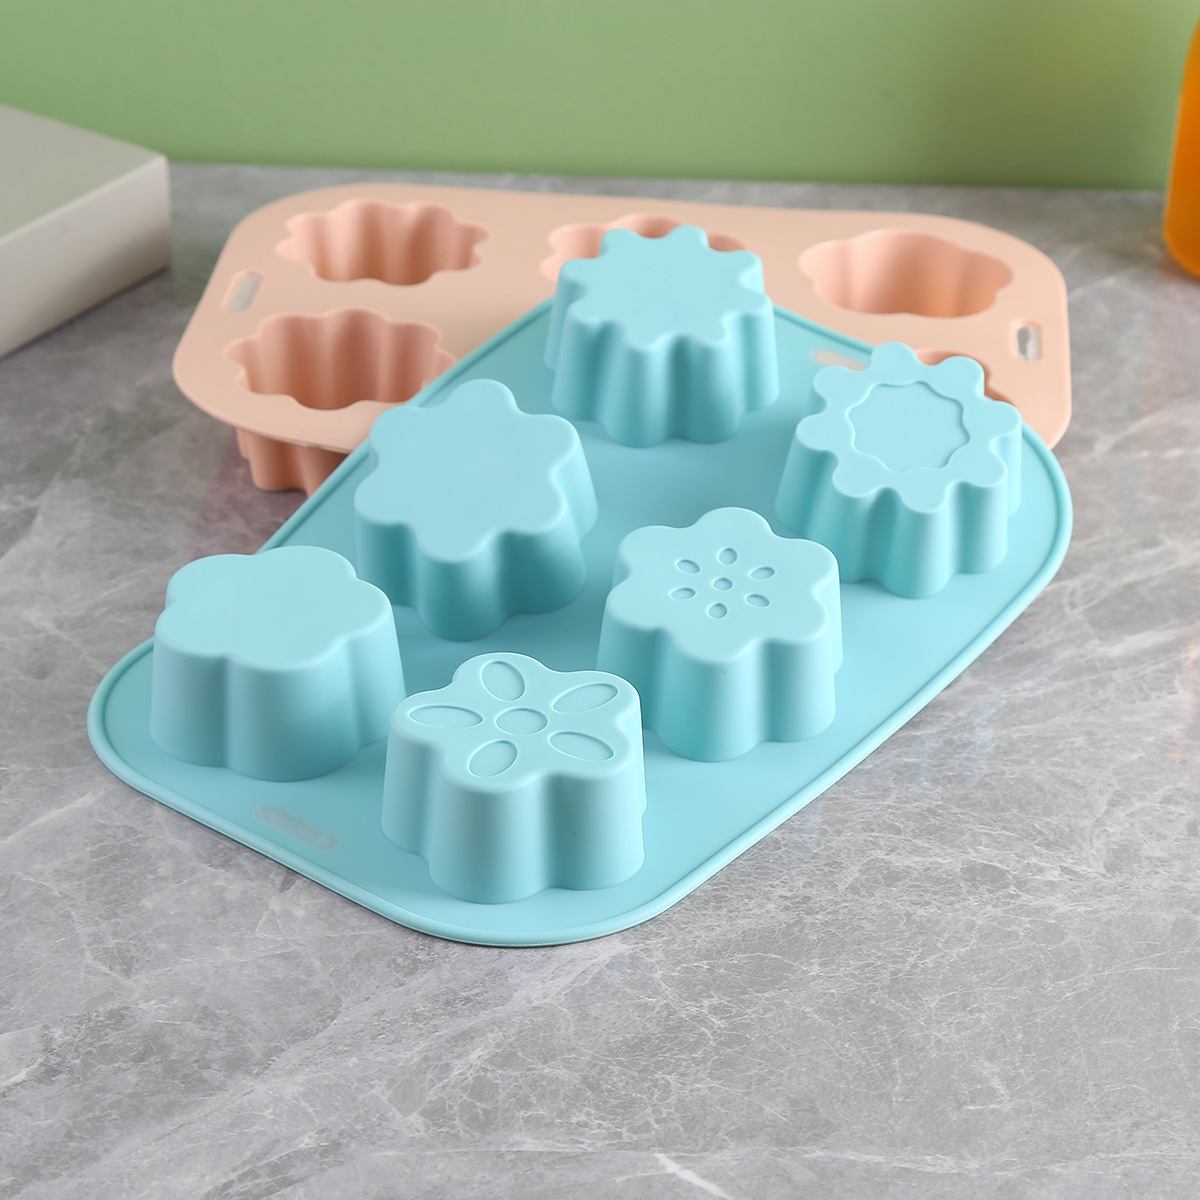 Mid-Autumn Moon Cake Mold Diy Handmade Soap Silicone Mold Silicone Chocolate Mold Ice Tray Ice Maker Wholesale